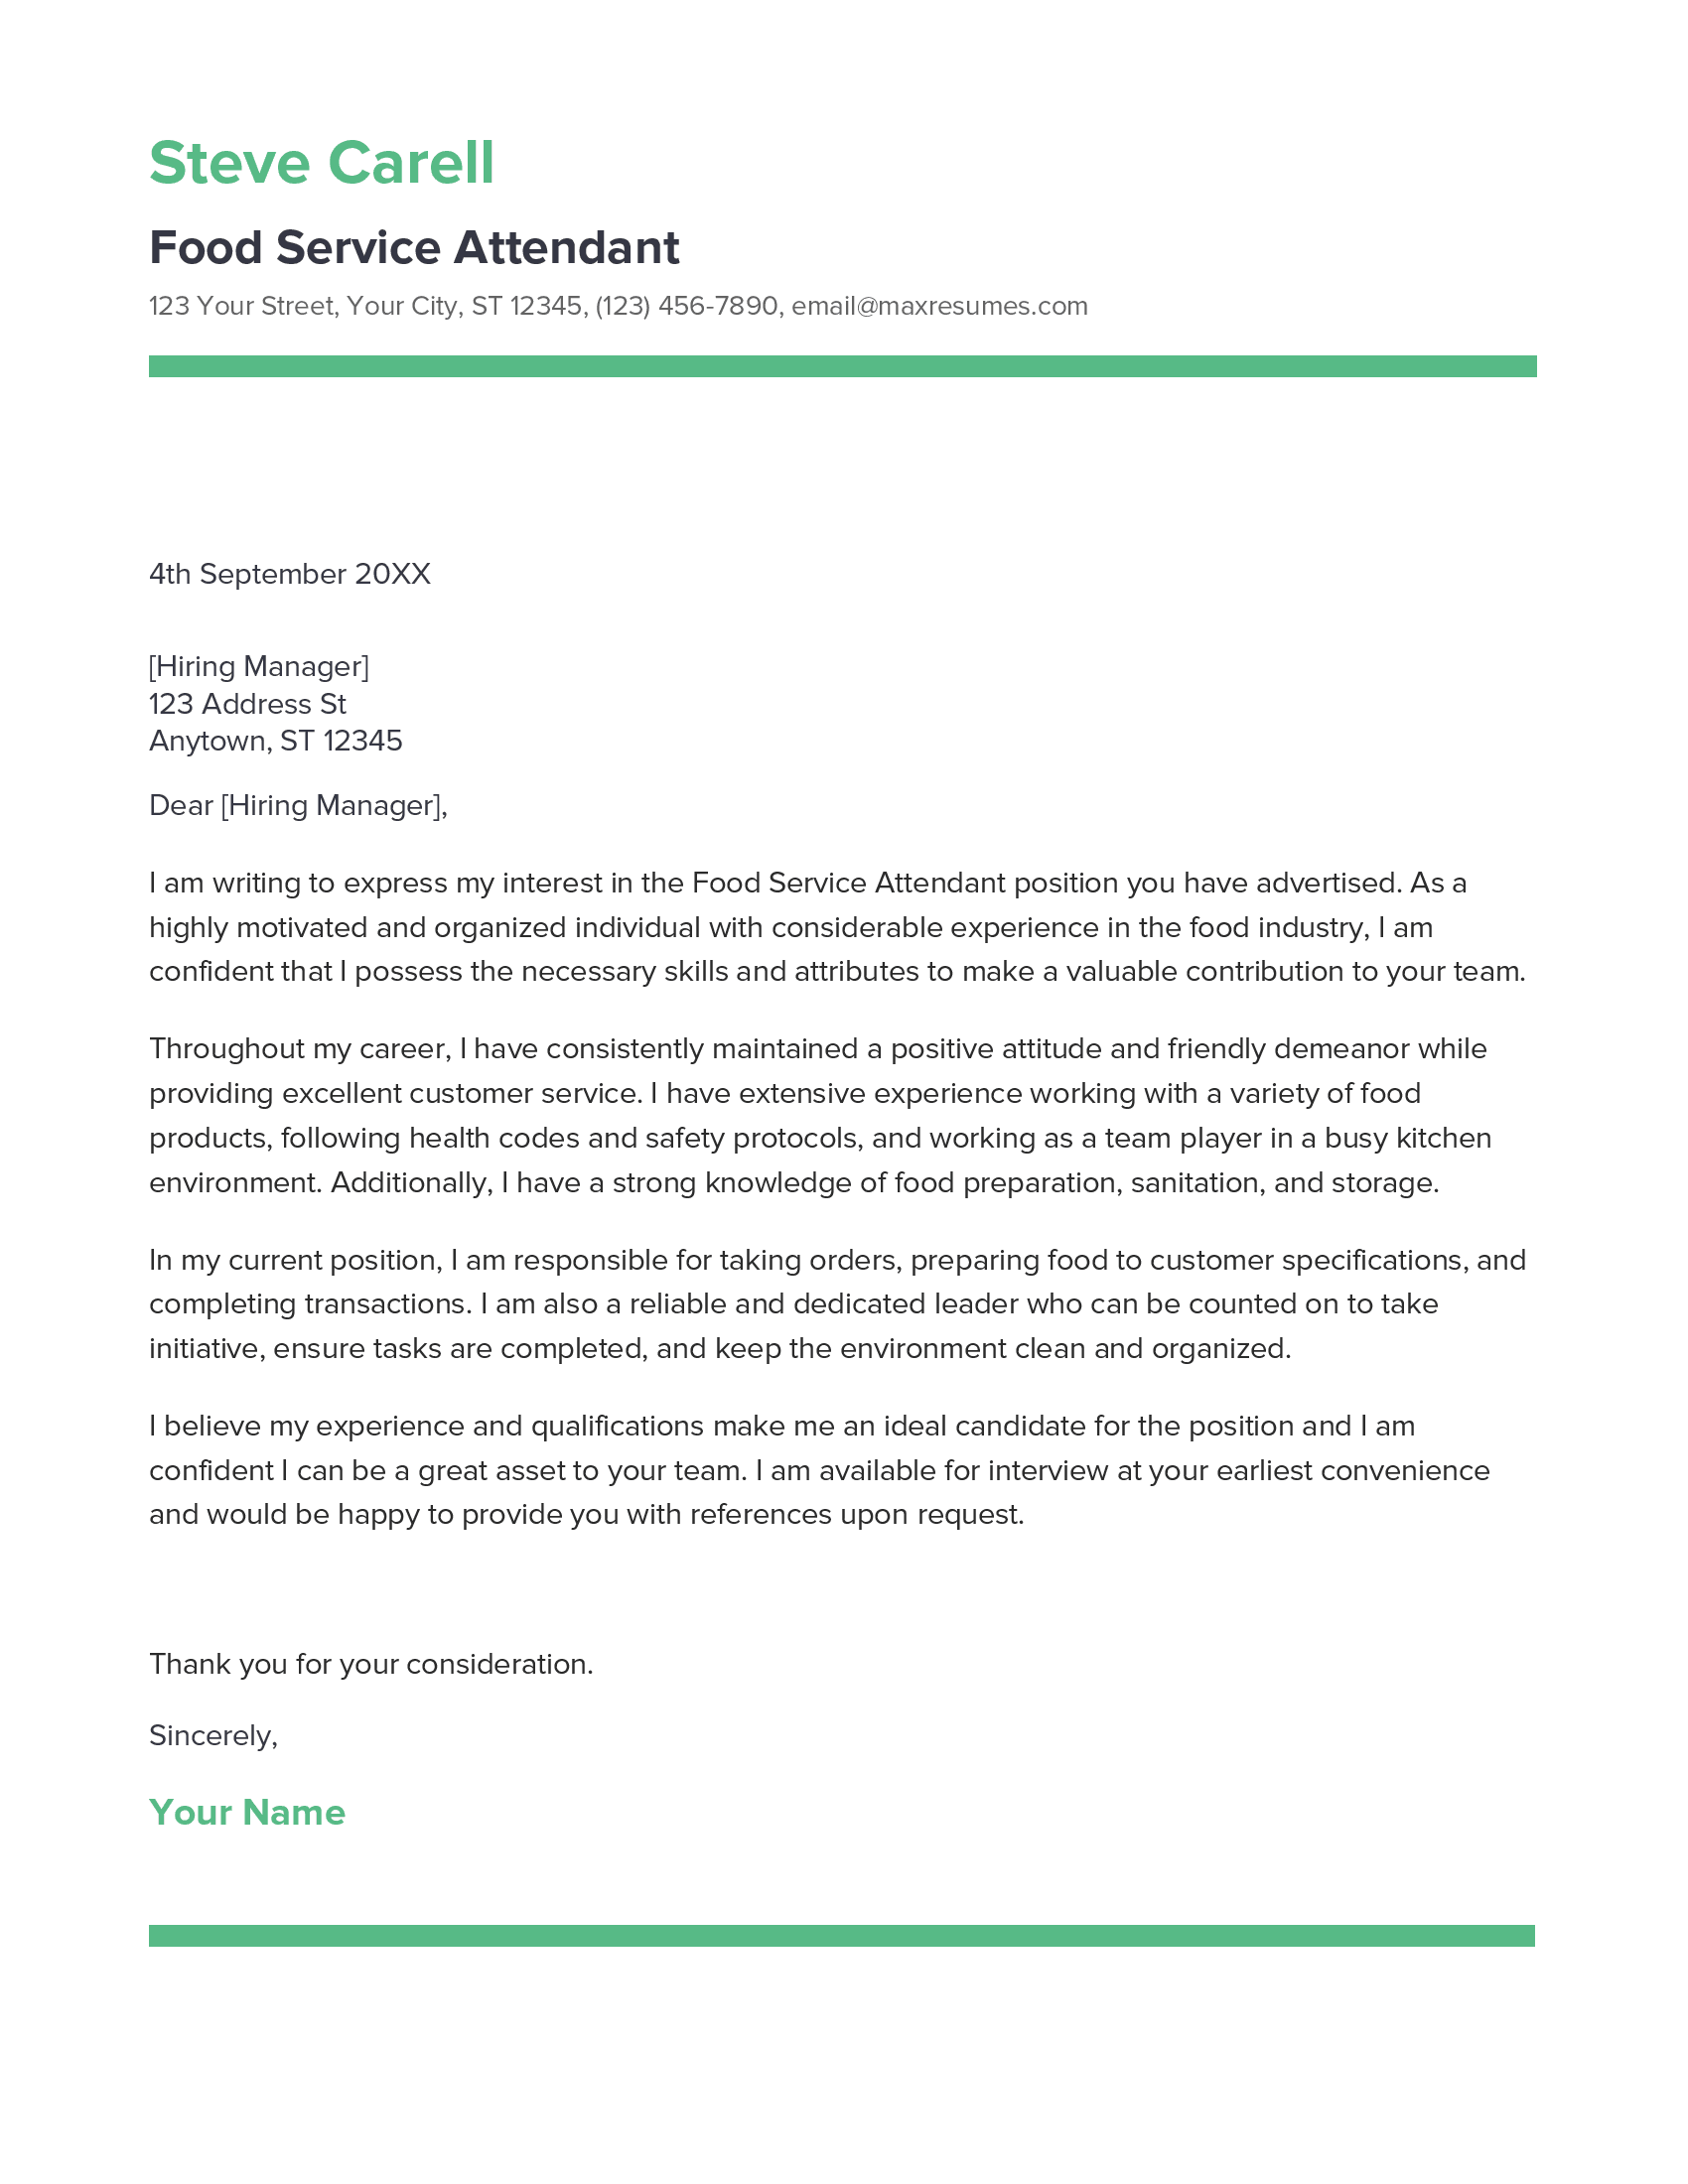 Food Service Attendant Cover Letter Example